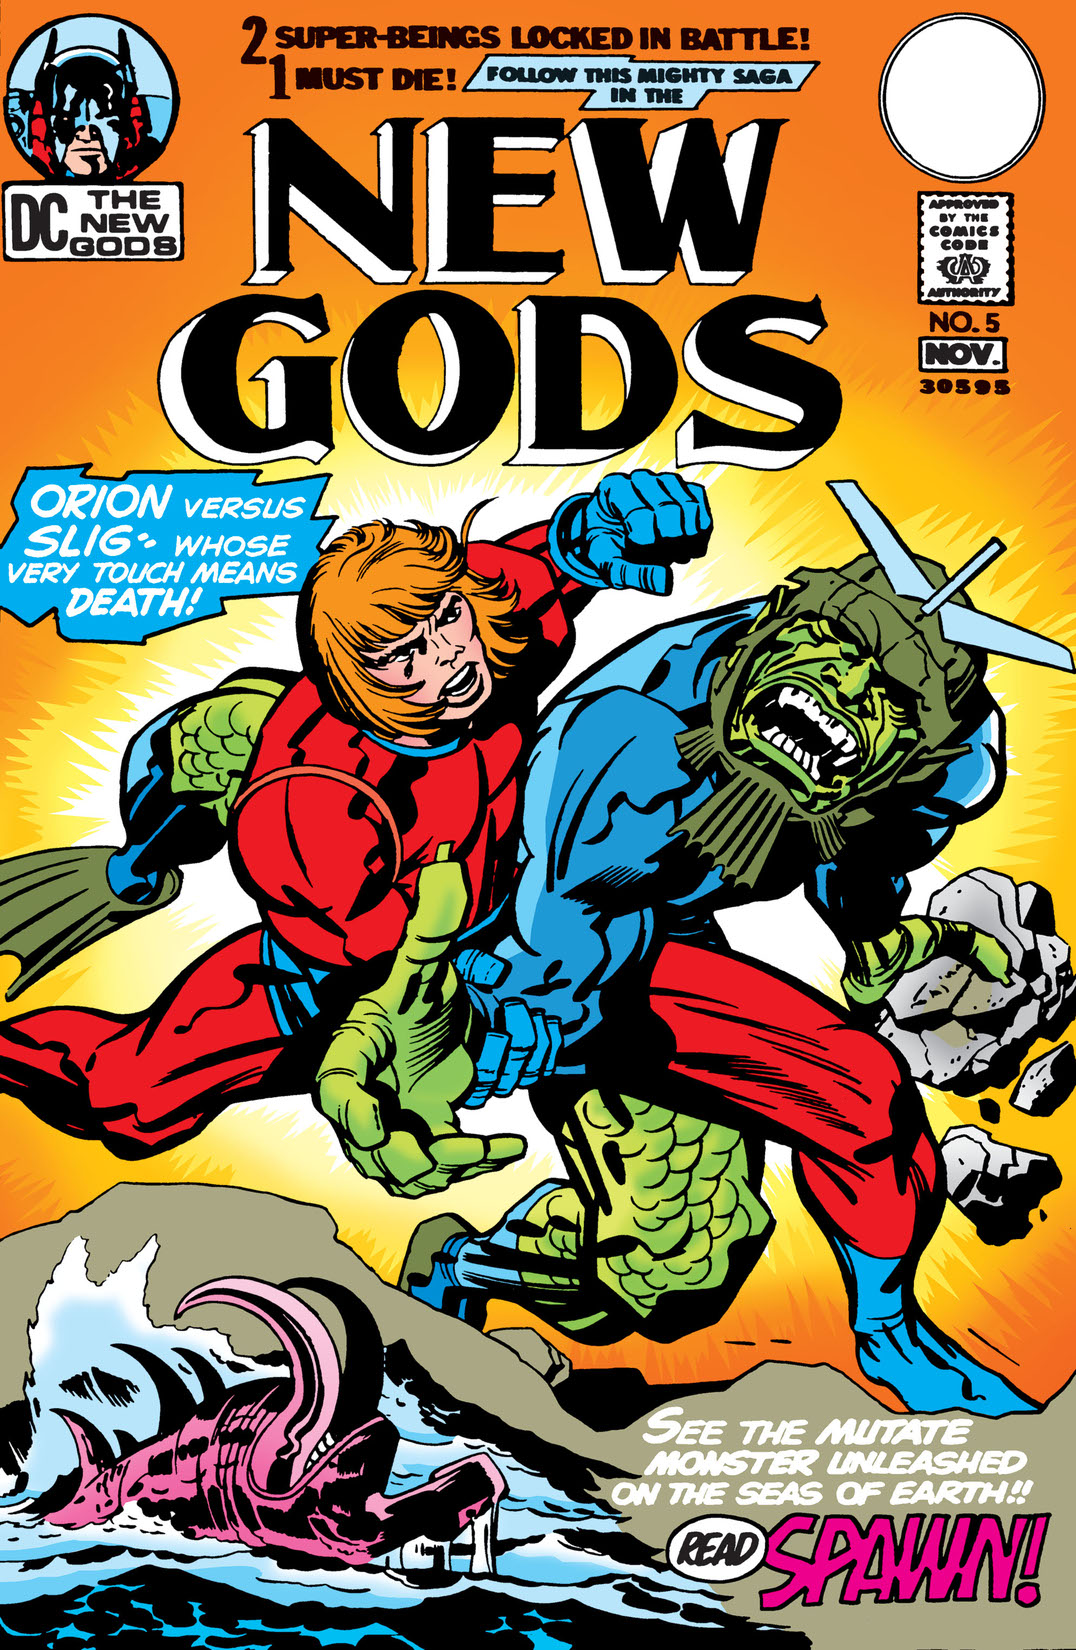 The New Gods #5 preview images